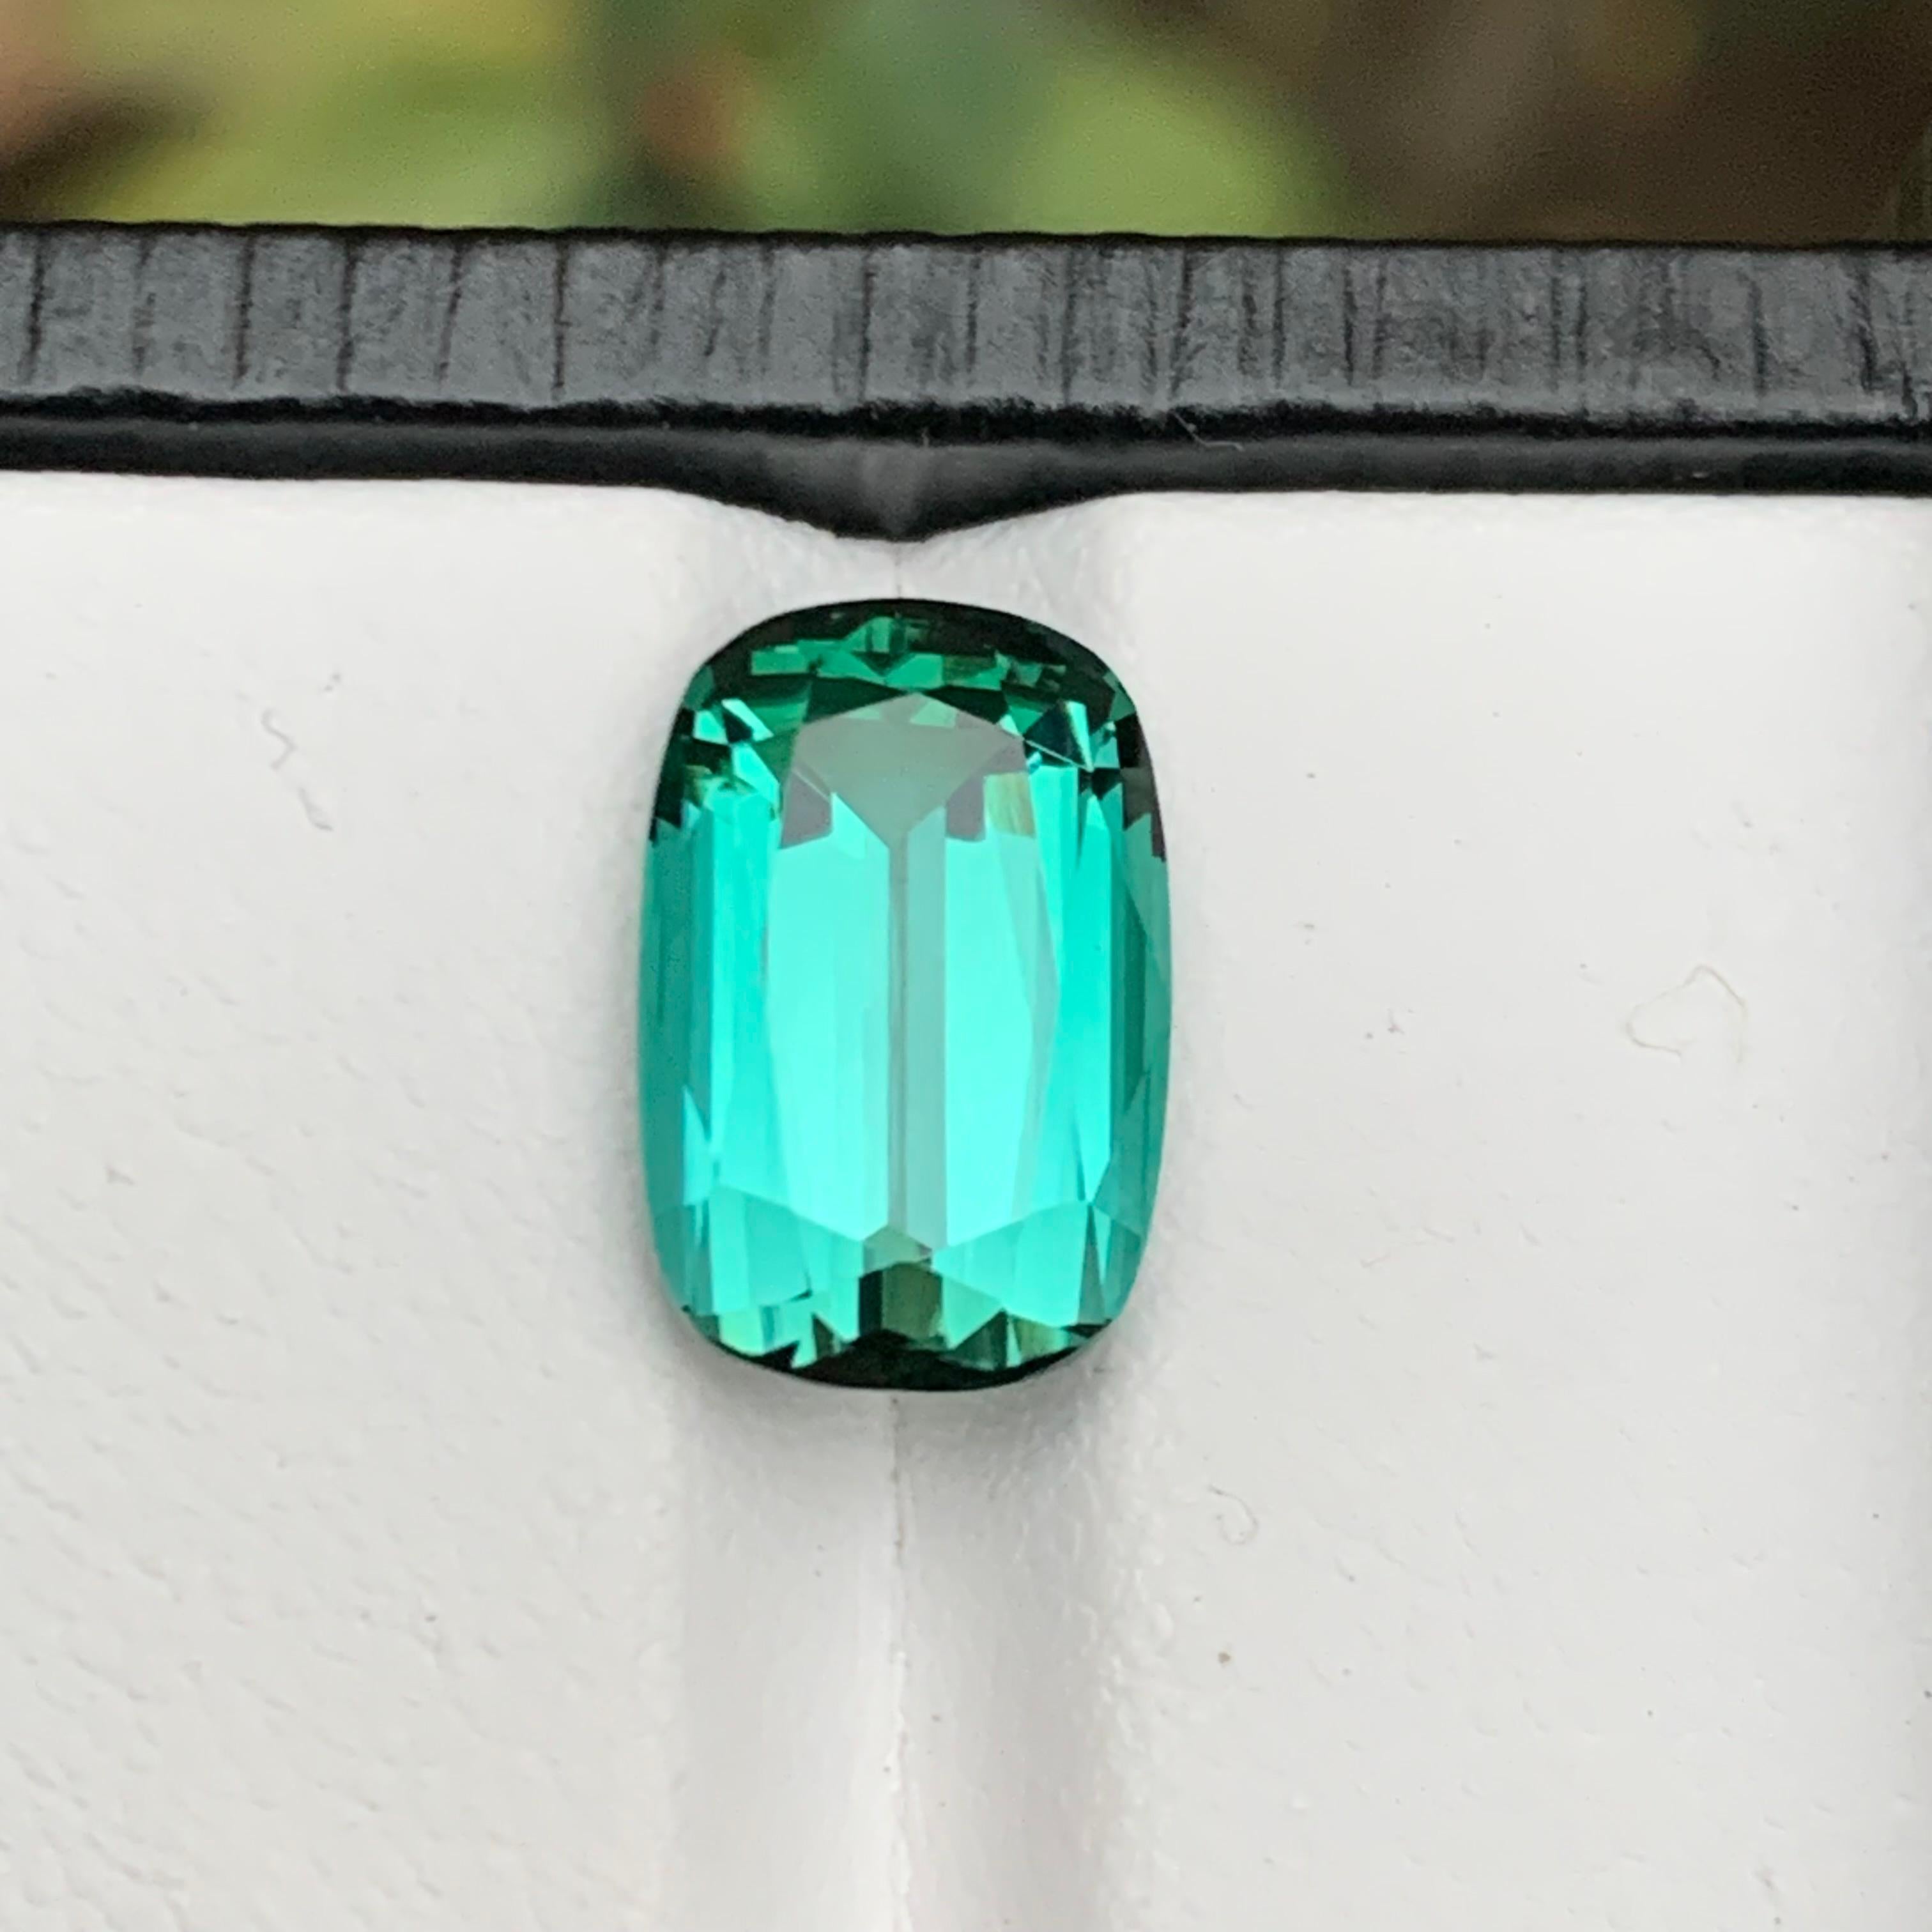 Extraordinary Step Cushion Cut Vivid Seafoam Natural Tourmaline. Mined in Afghanistan, this rare gemstone weighs 5.55 carats and boasts a mesmerizing luster with impeccable loupe clean clarity. Perfect for those seeking a distinctive touch, it's an